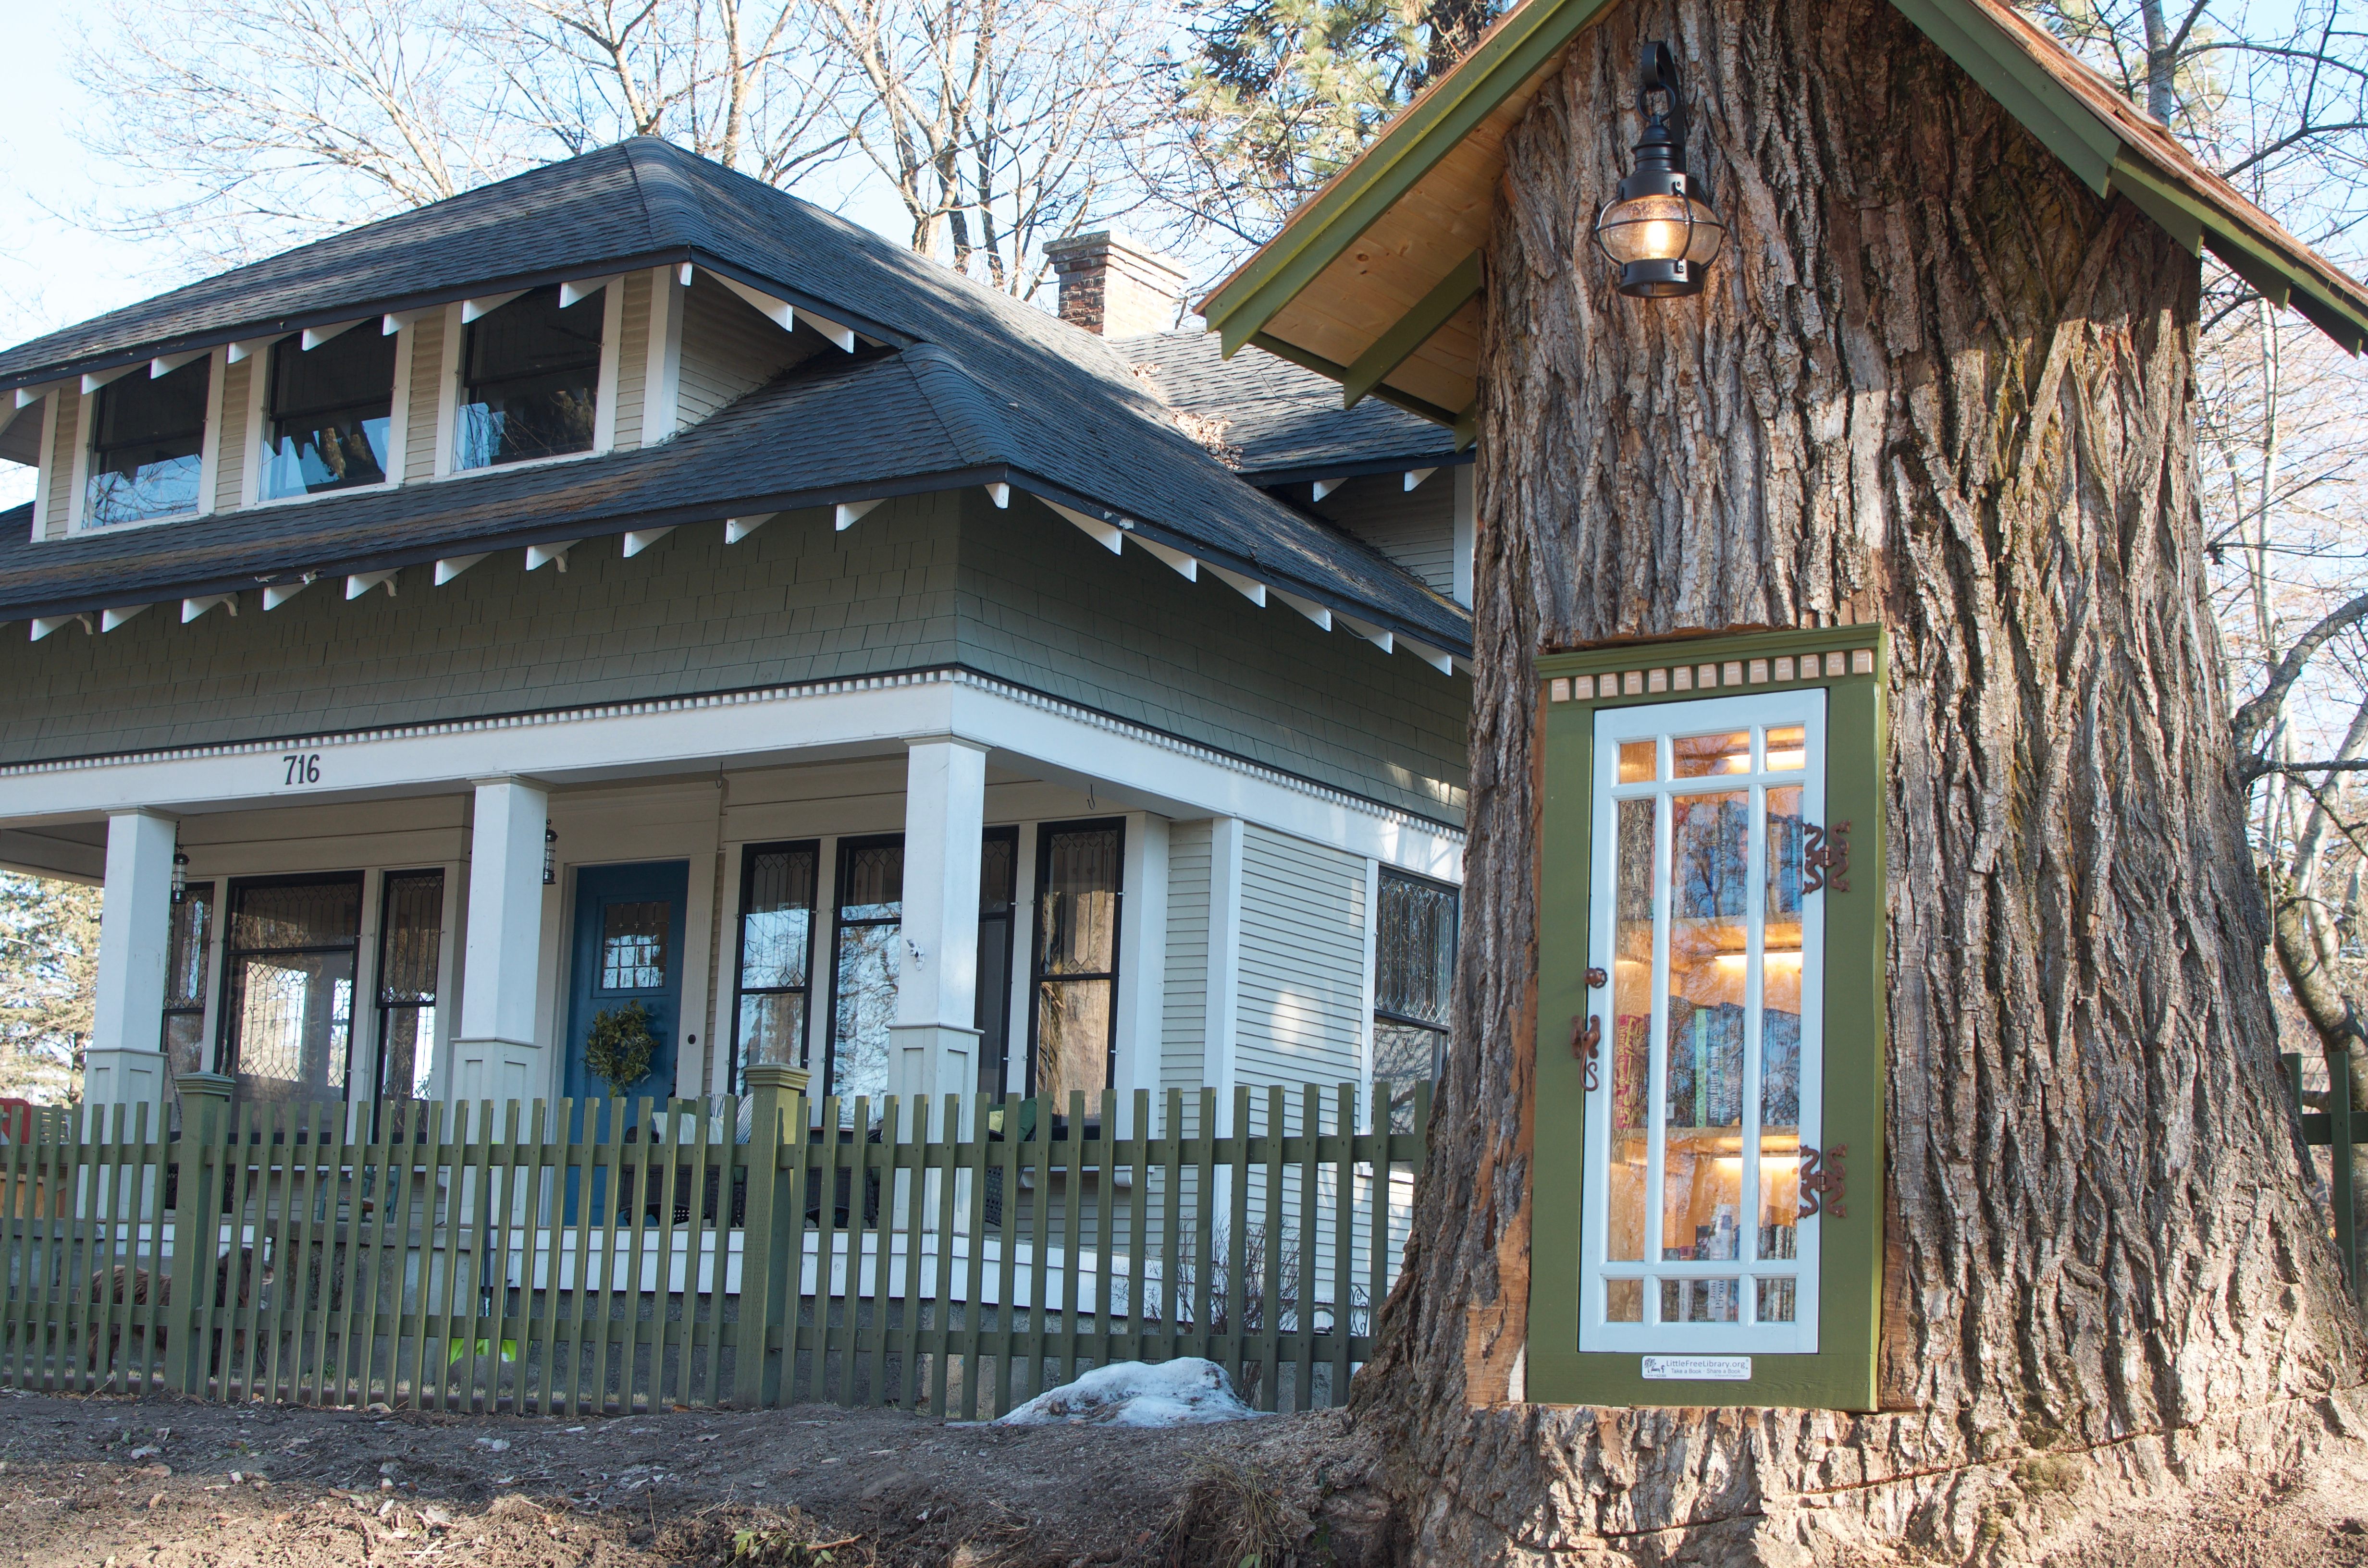 The Most Magical 'Little Free Library' Is Built Right Into a Tree